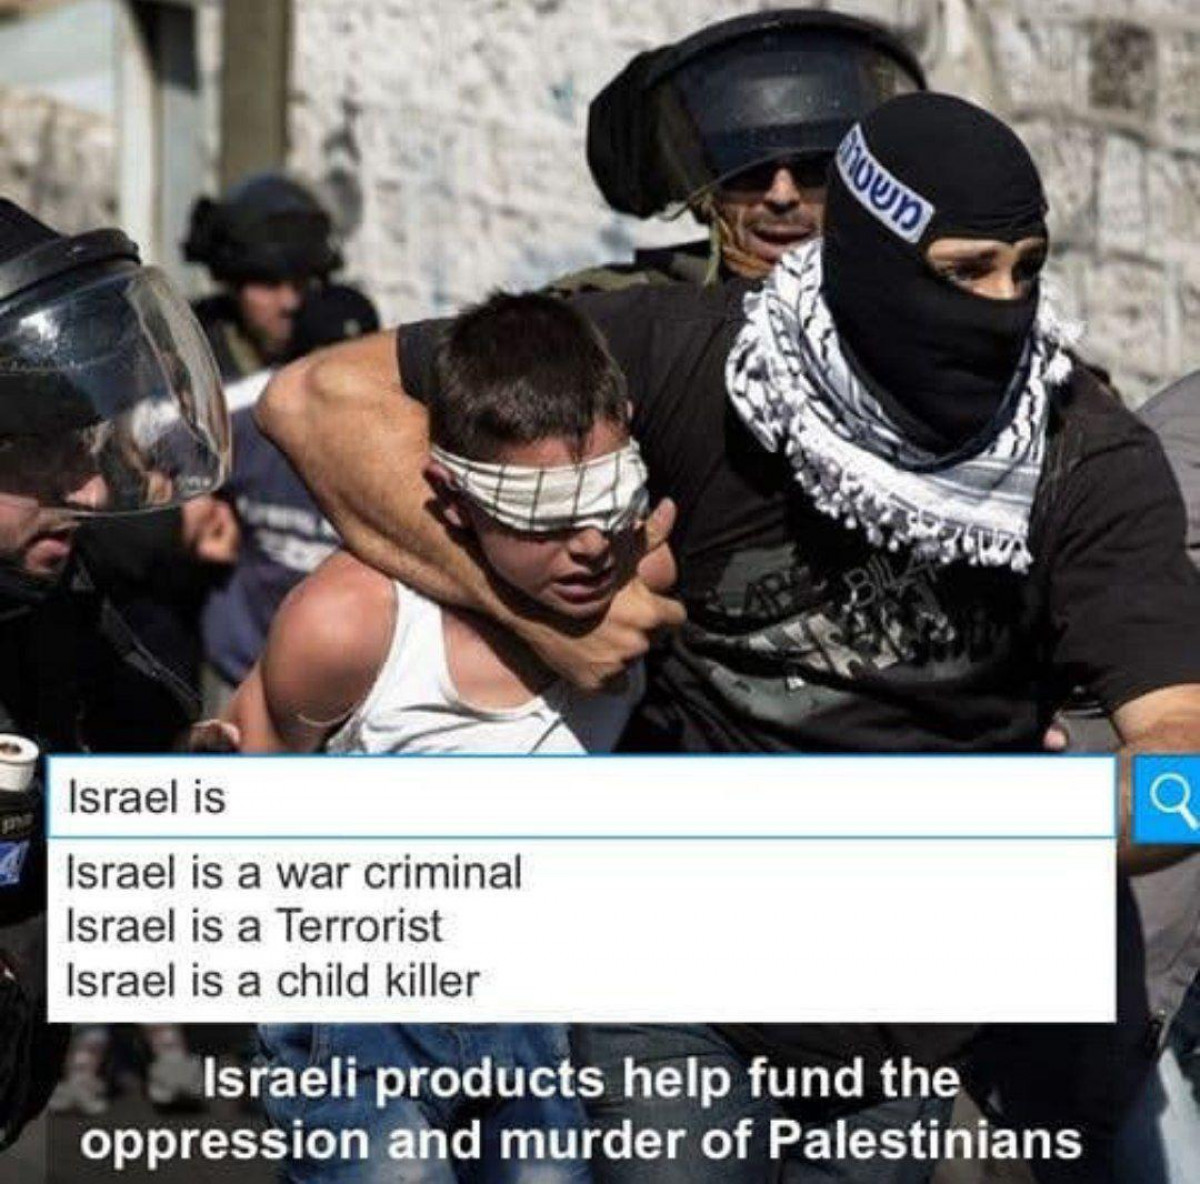 Israeli products help fund the oppression and murder of Palestinians